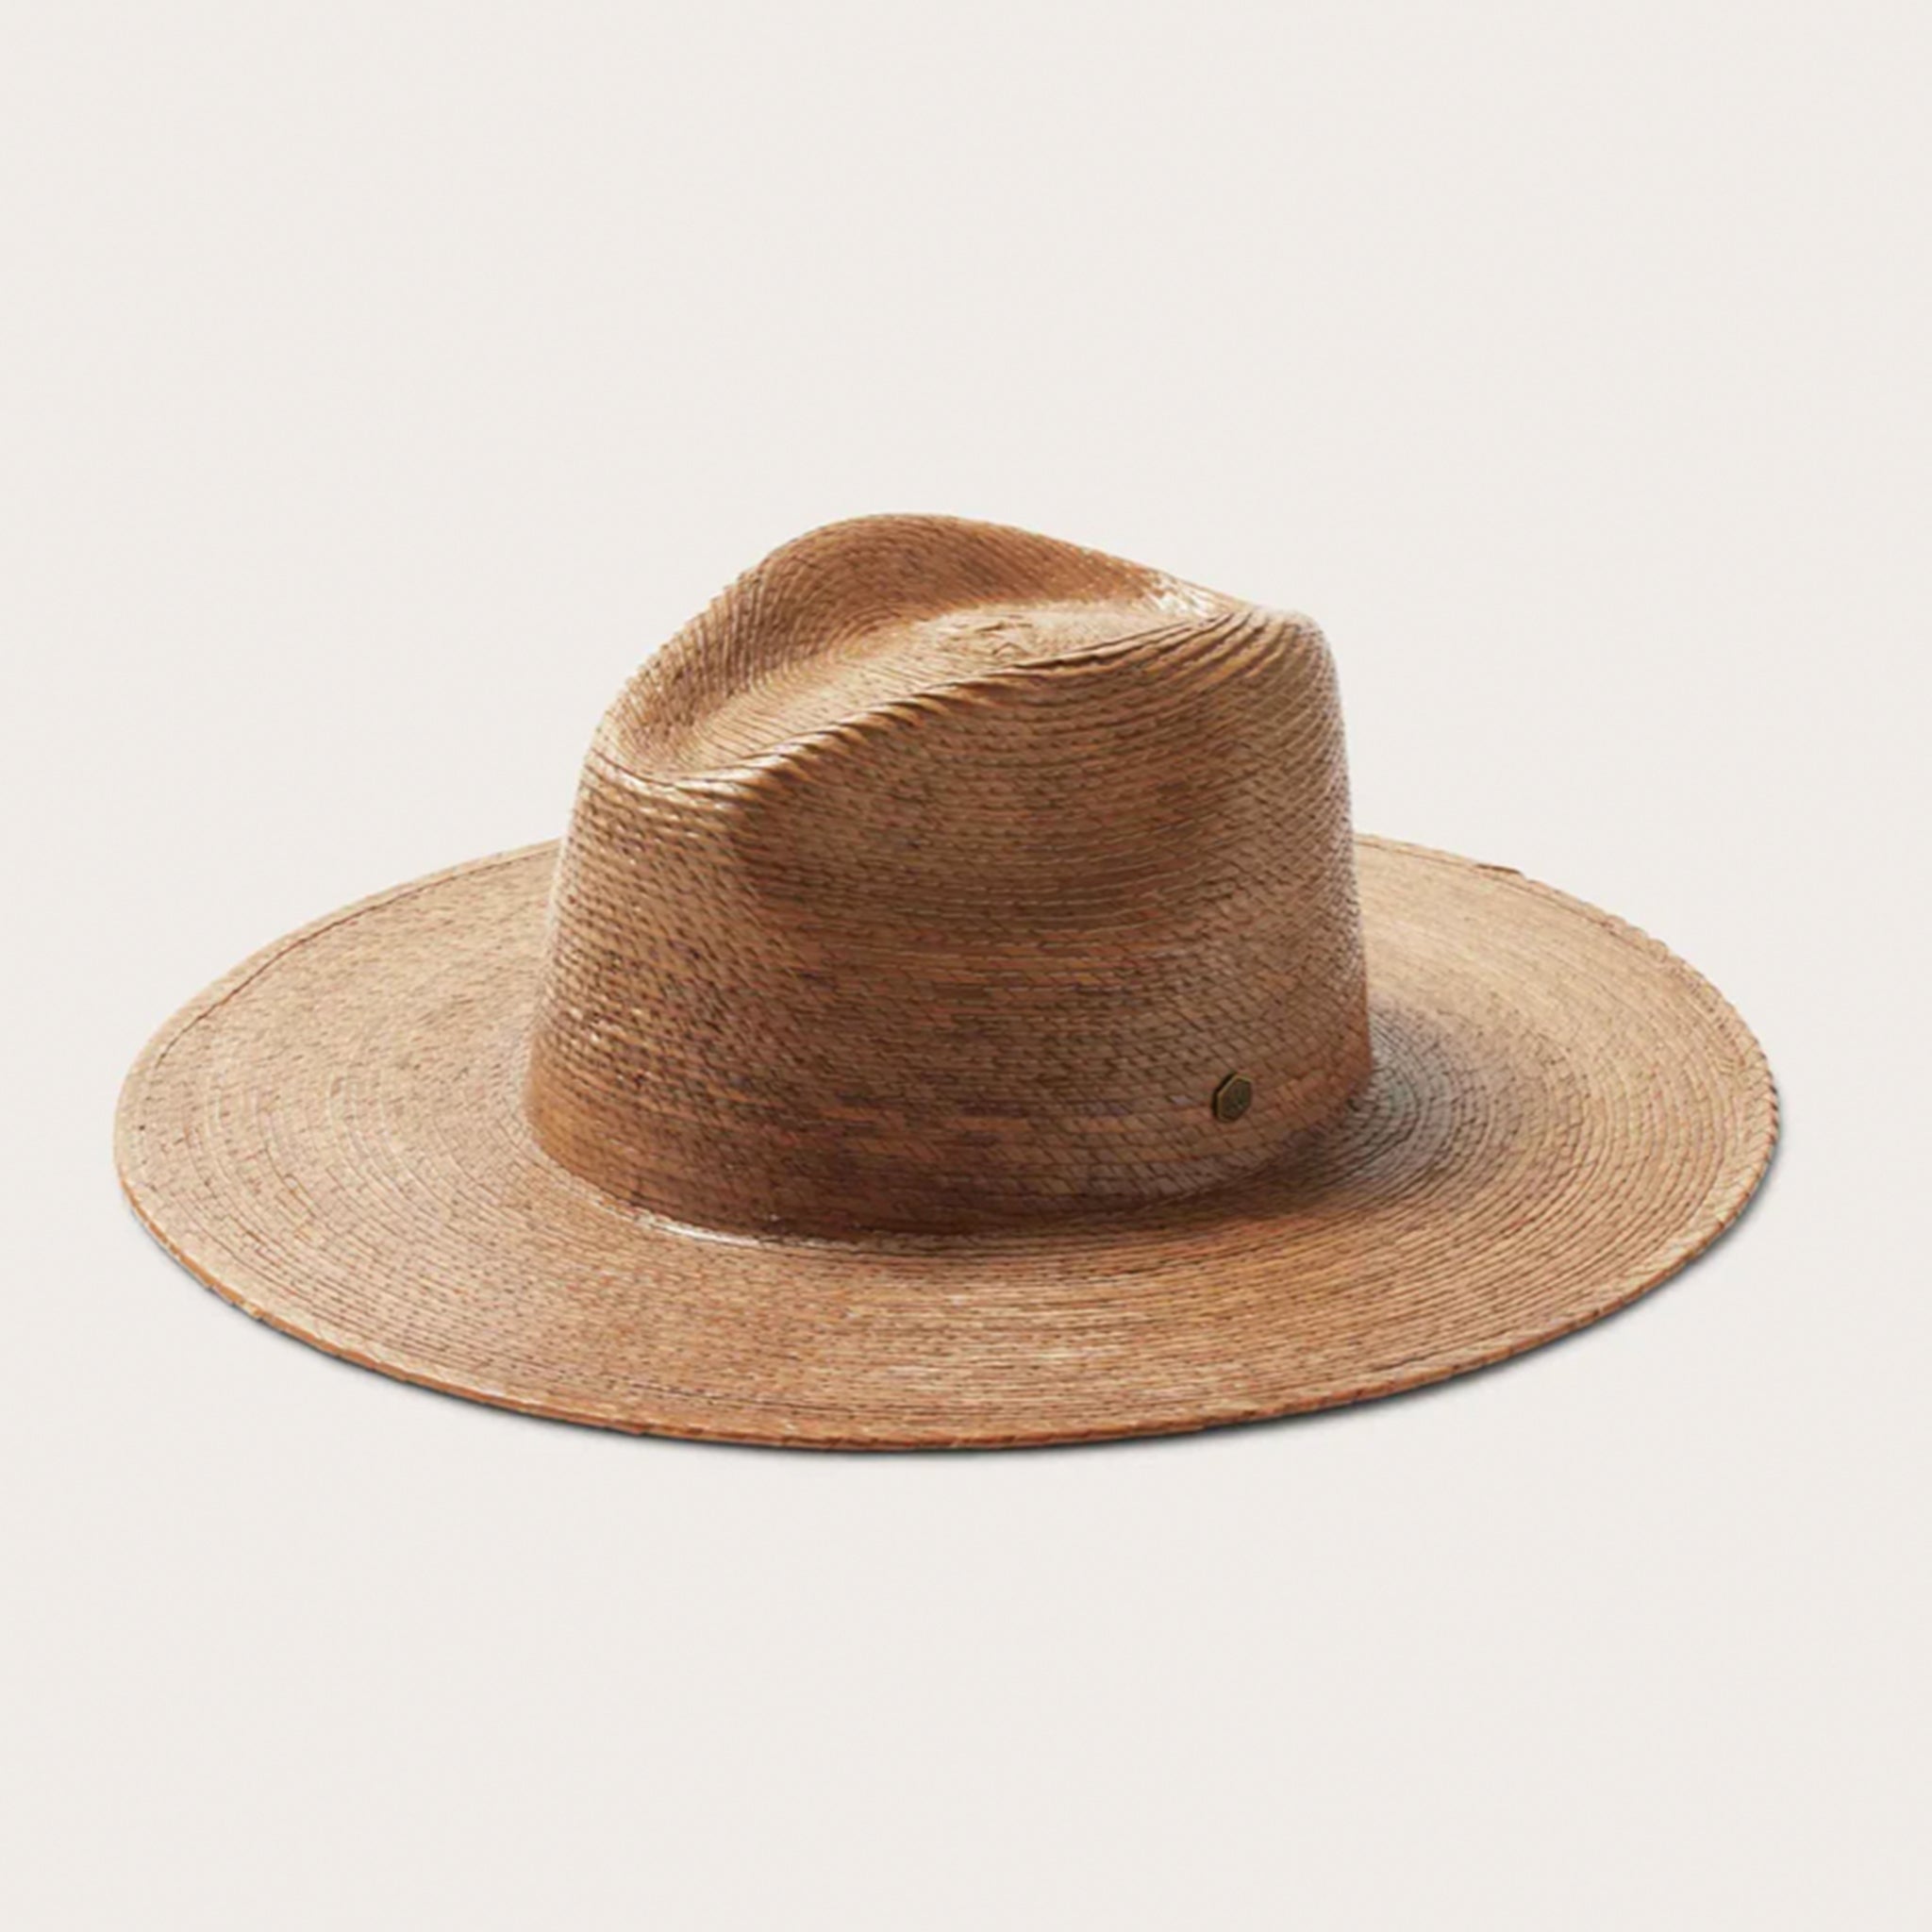 A neutral brown woven sun hat with a wide brim.